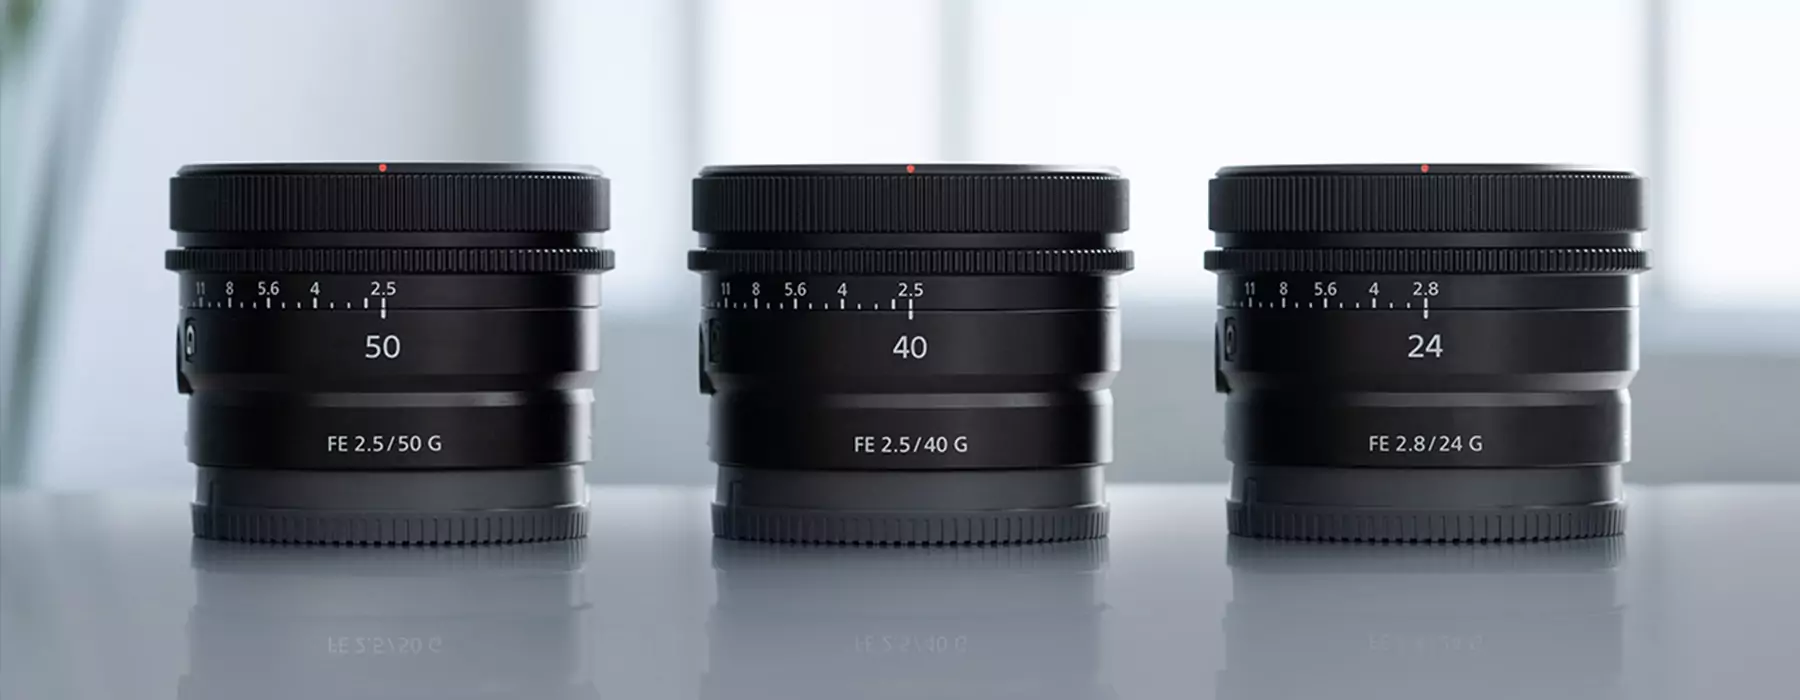 Sony Ultra Compact Lenses